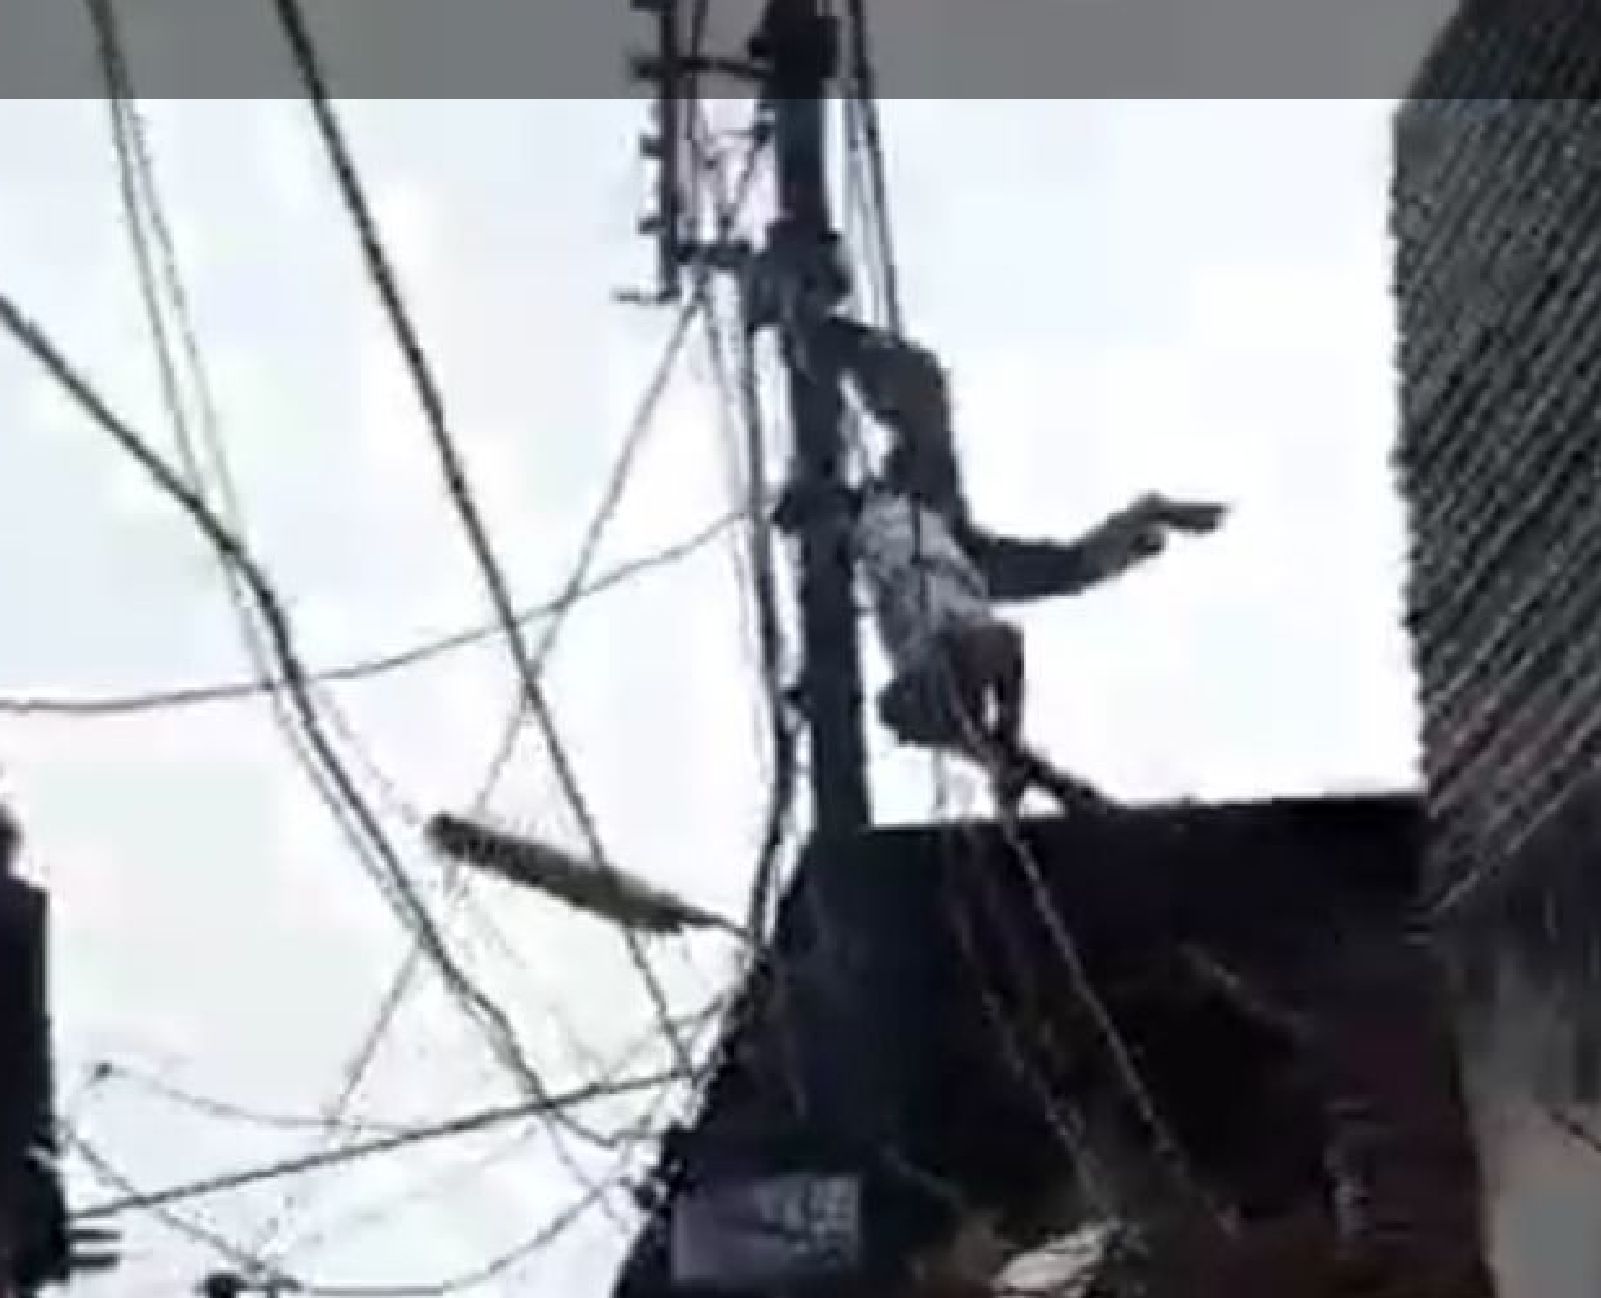 Live Video: Line main hanging upside down on electricity pole, saved alive